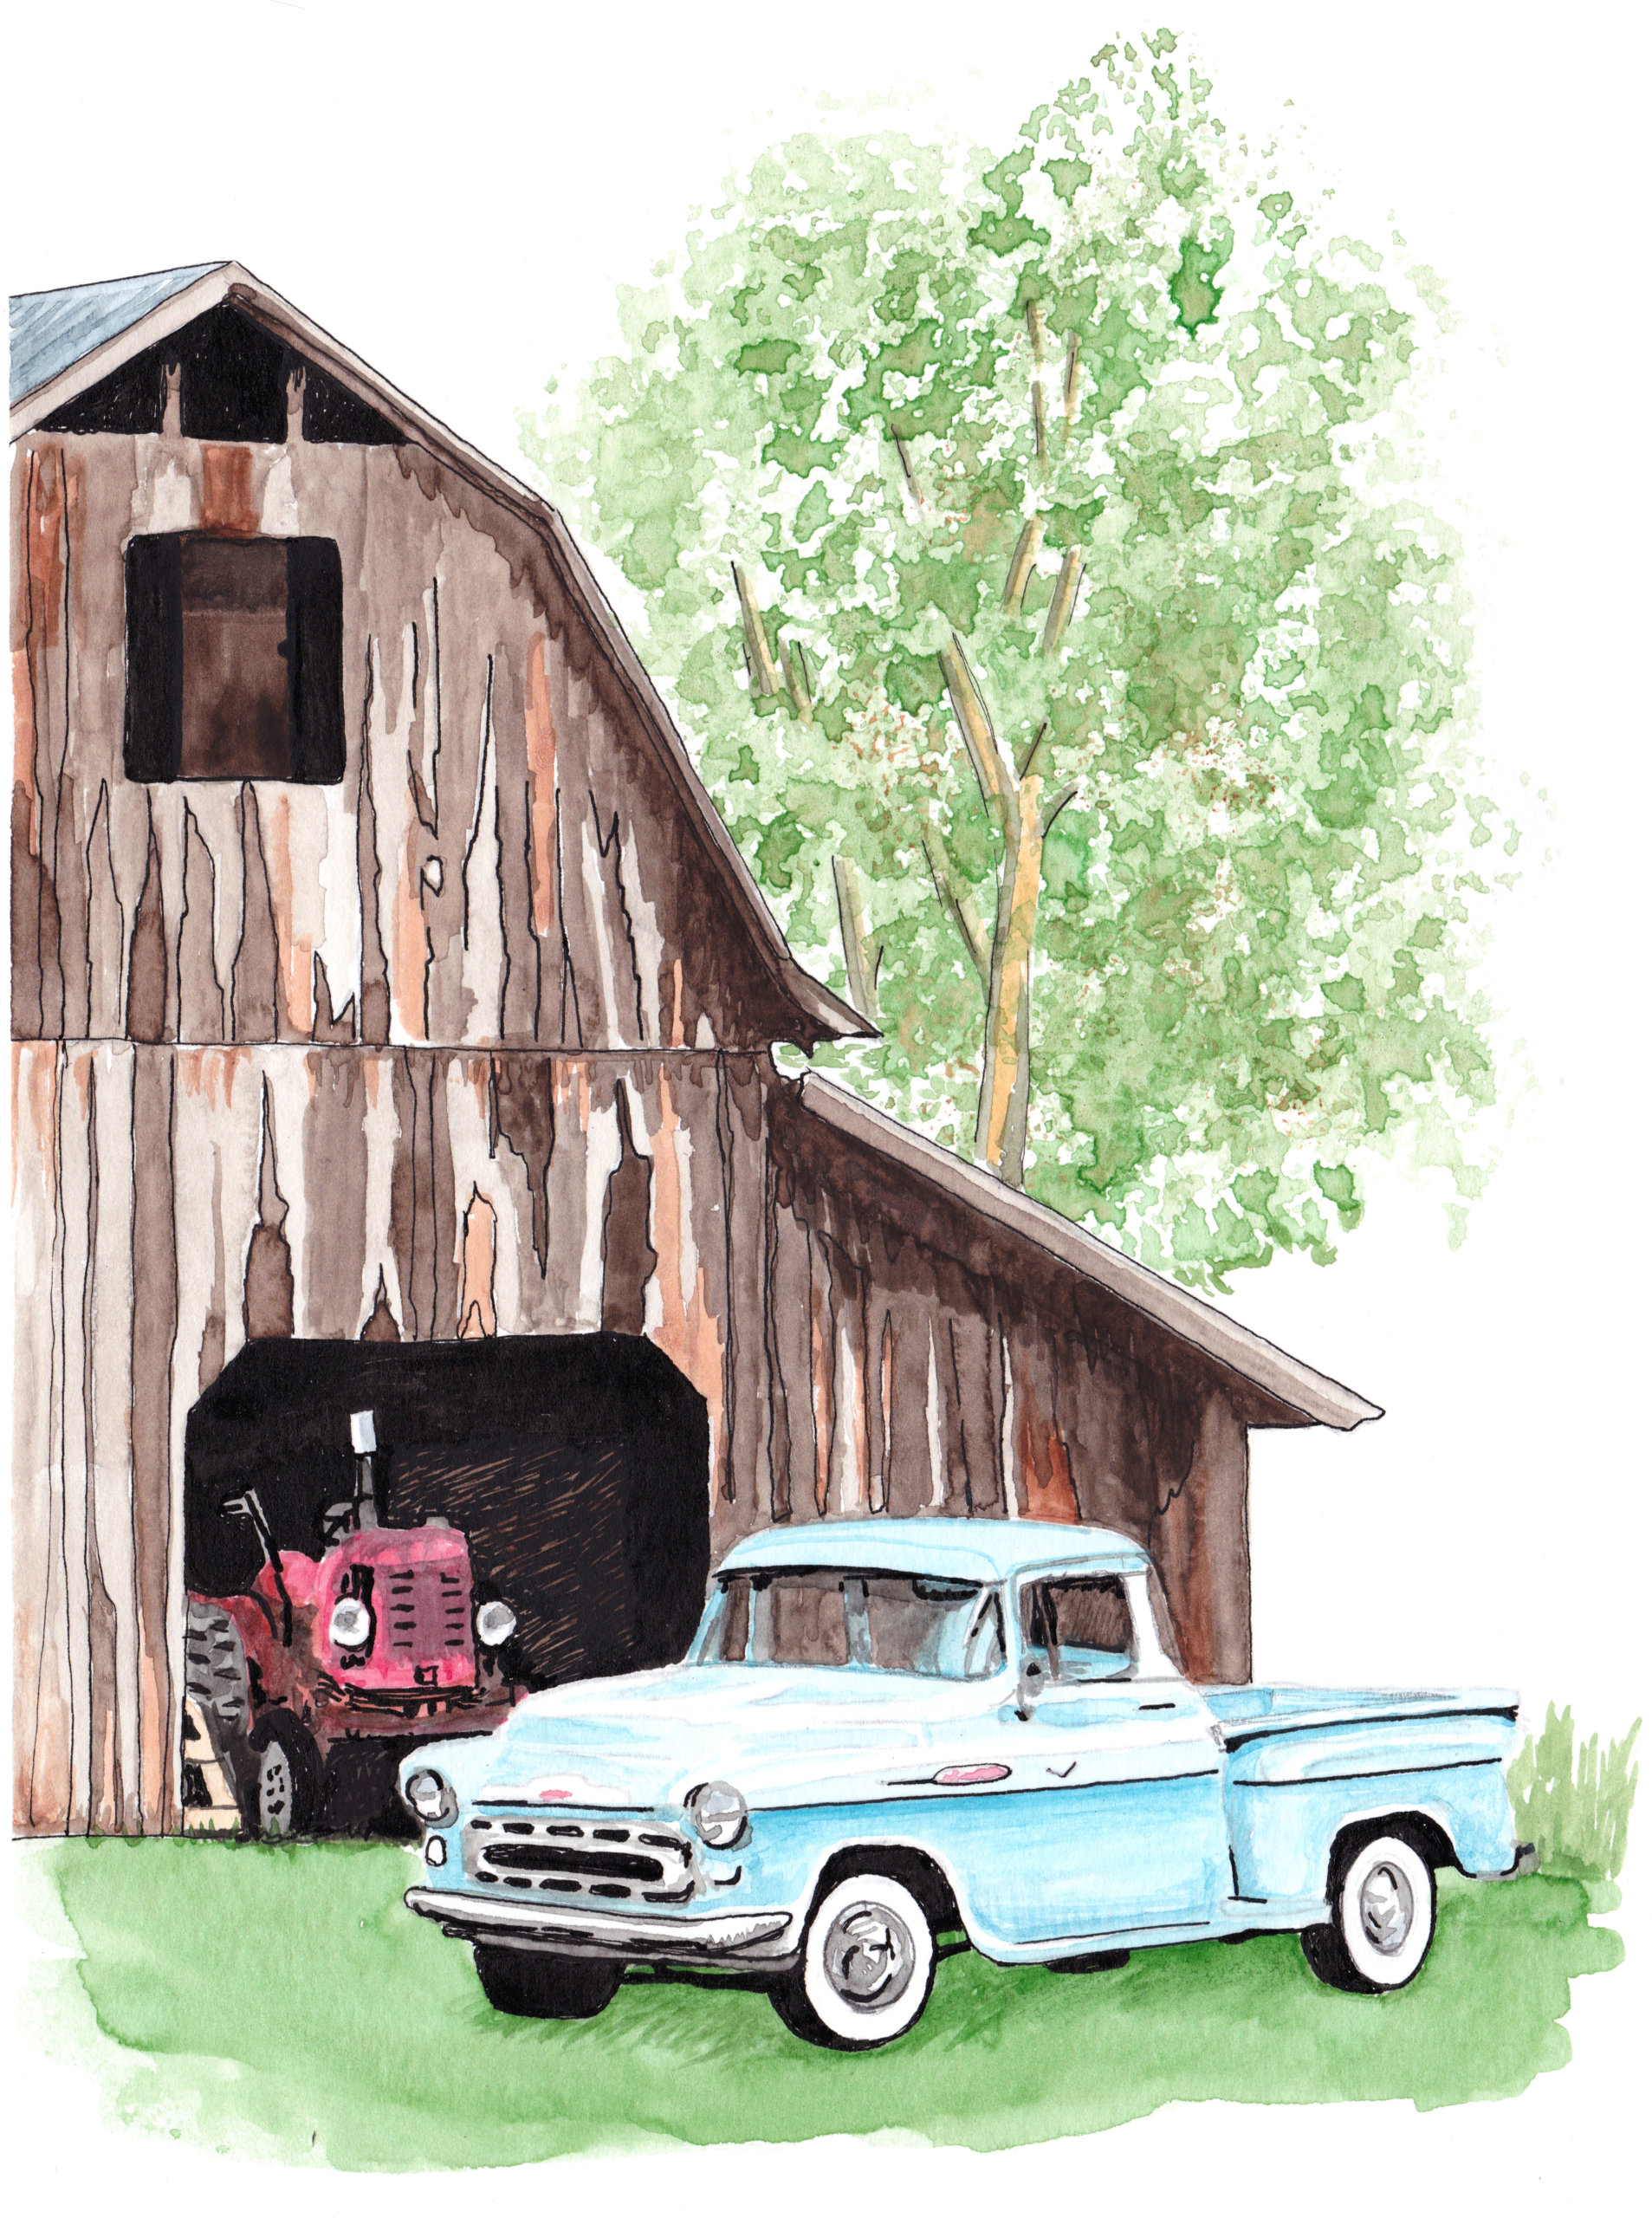 "Truck Barn #3" by Lisa Claisse